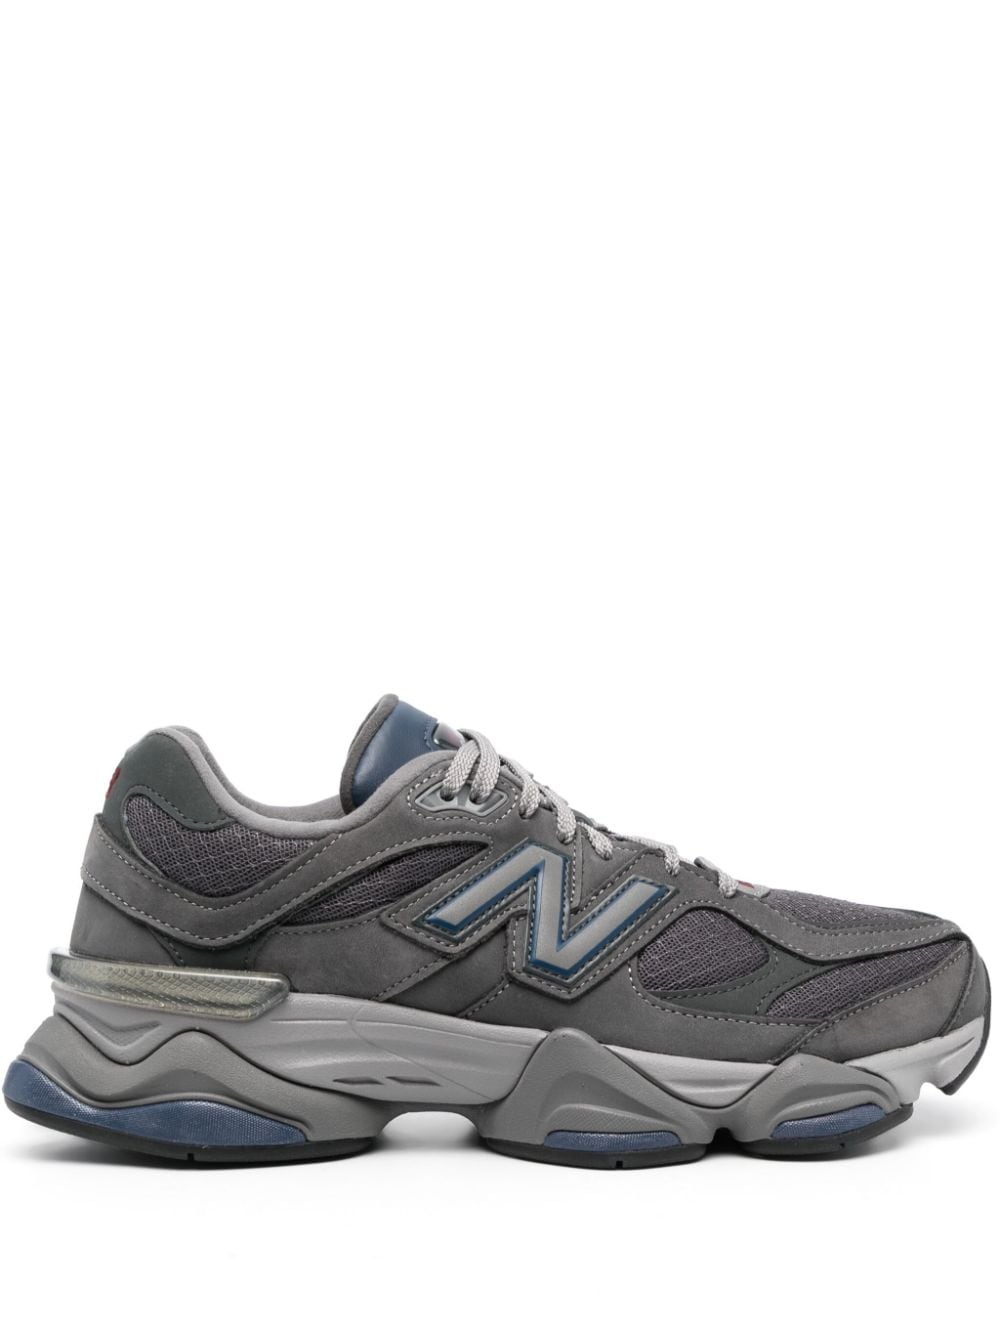 New Balance 9060 panelled suede sneakers - Grey